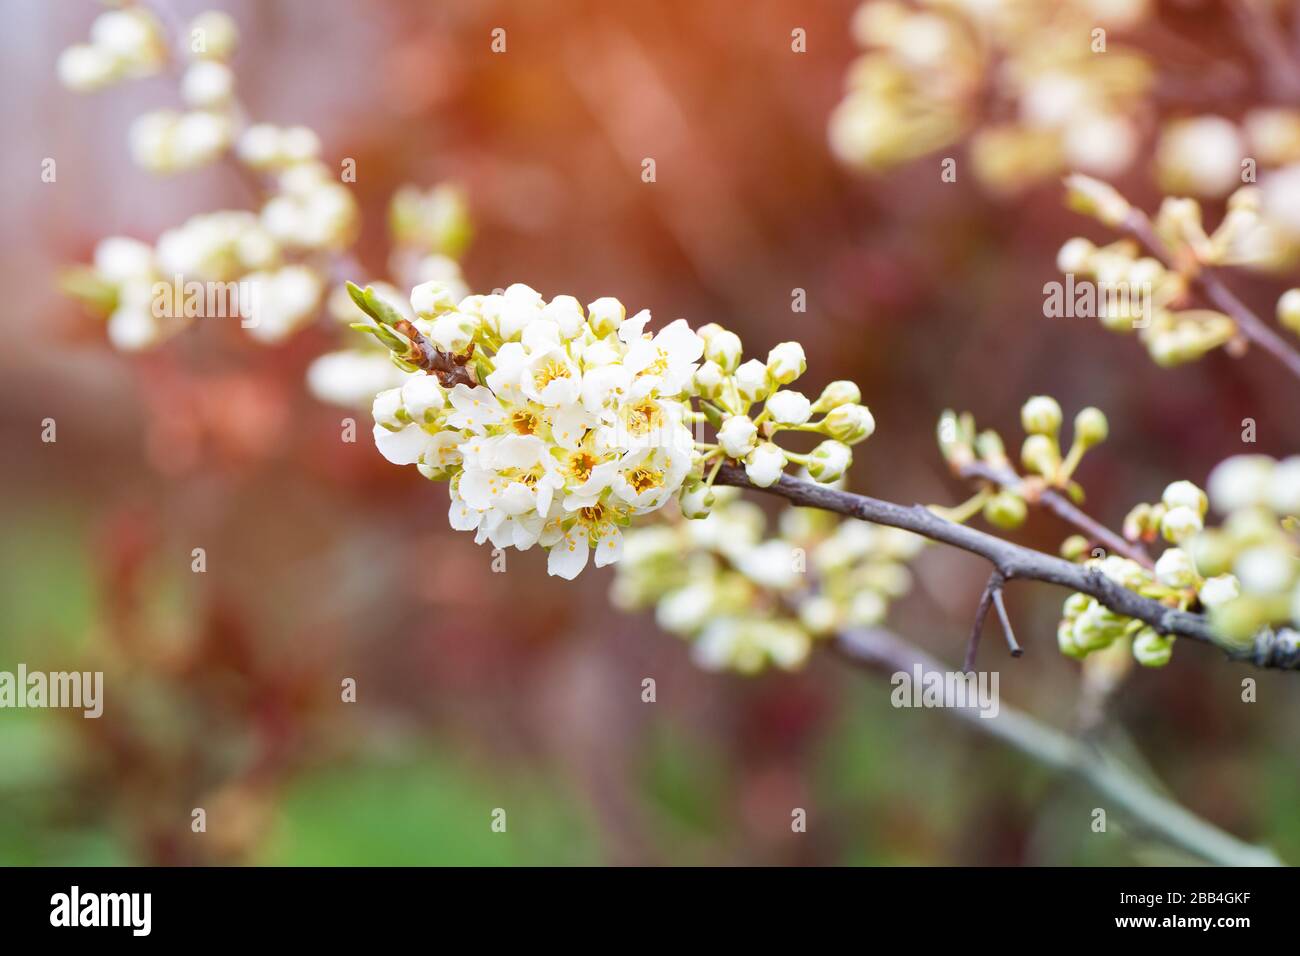 Plum tree branch blossoms in the garden Stock Photo